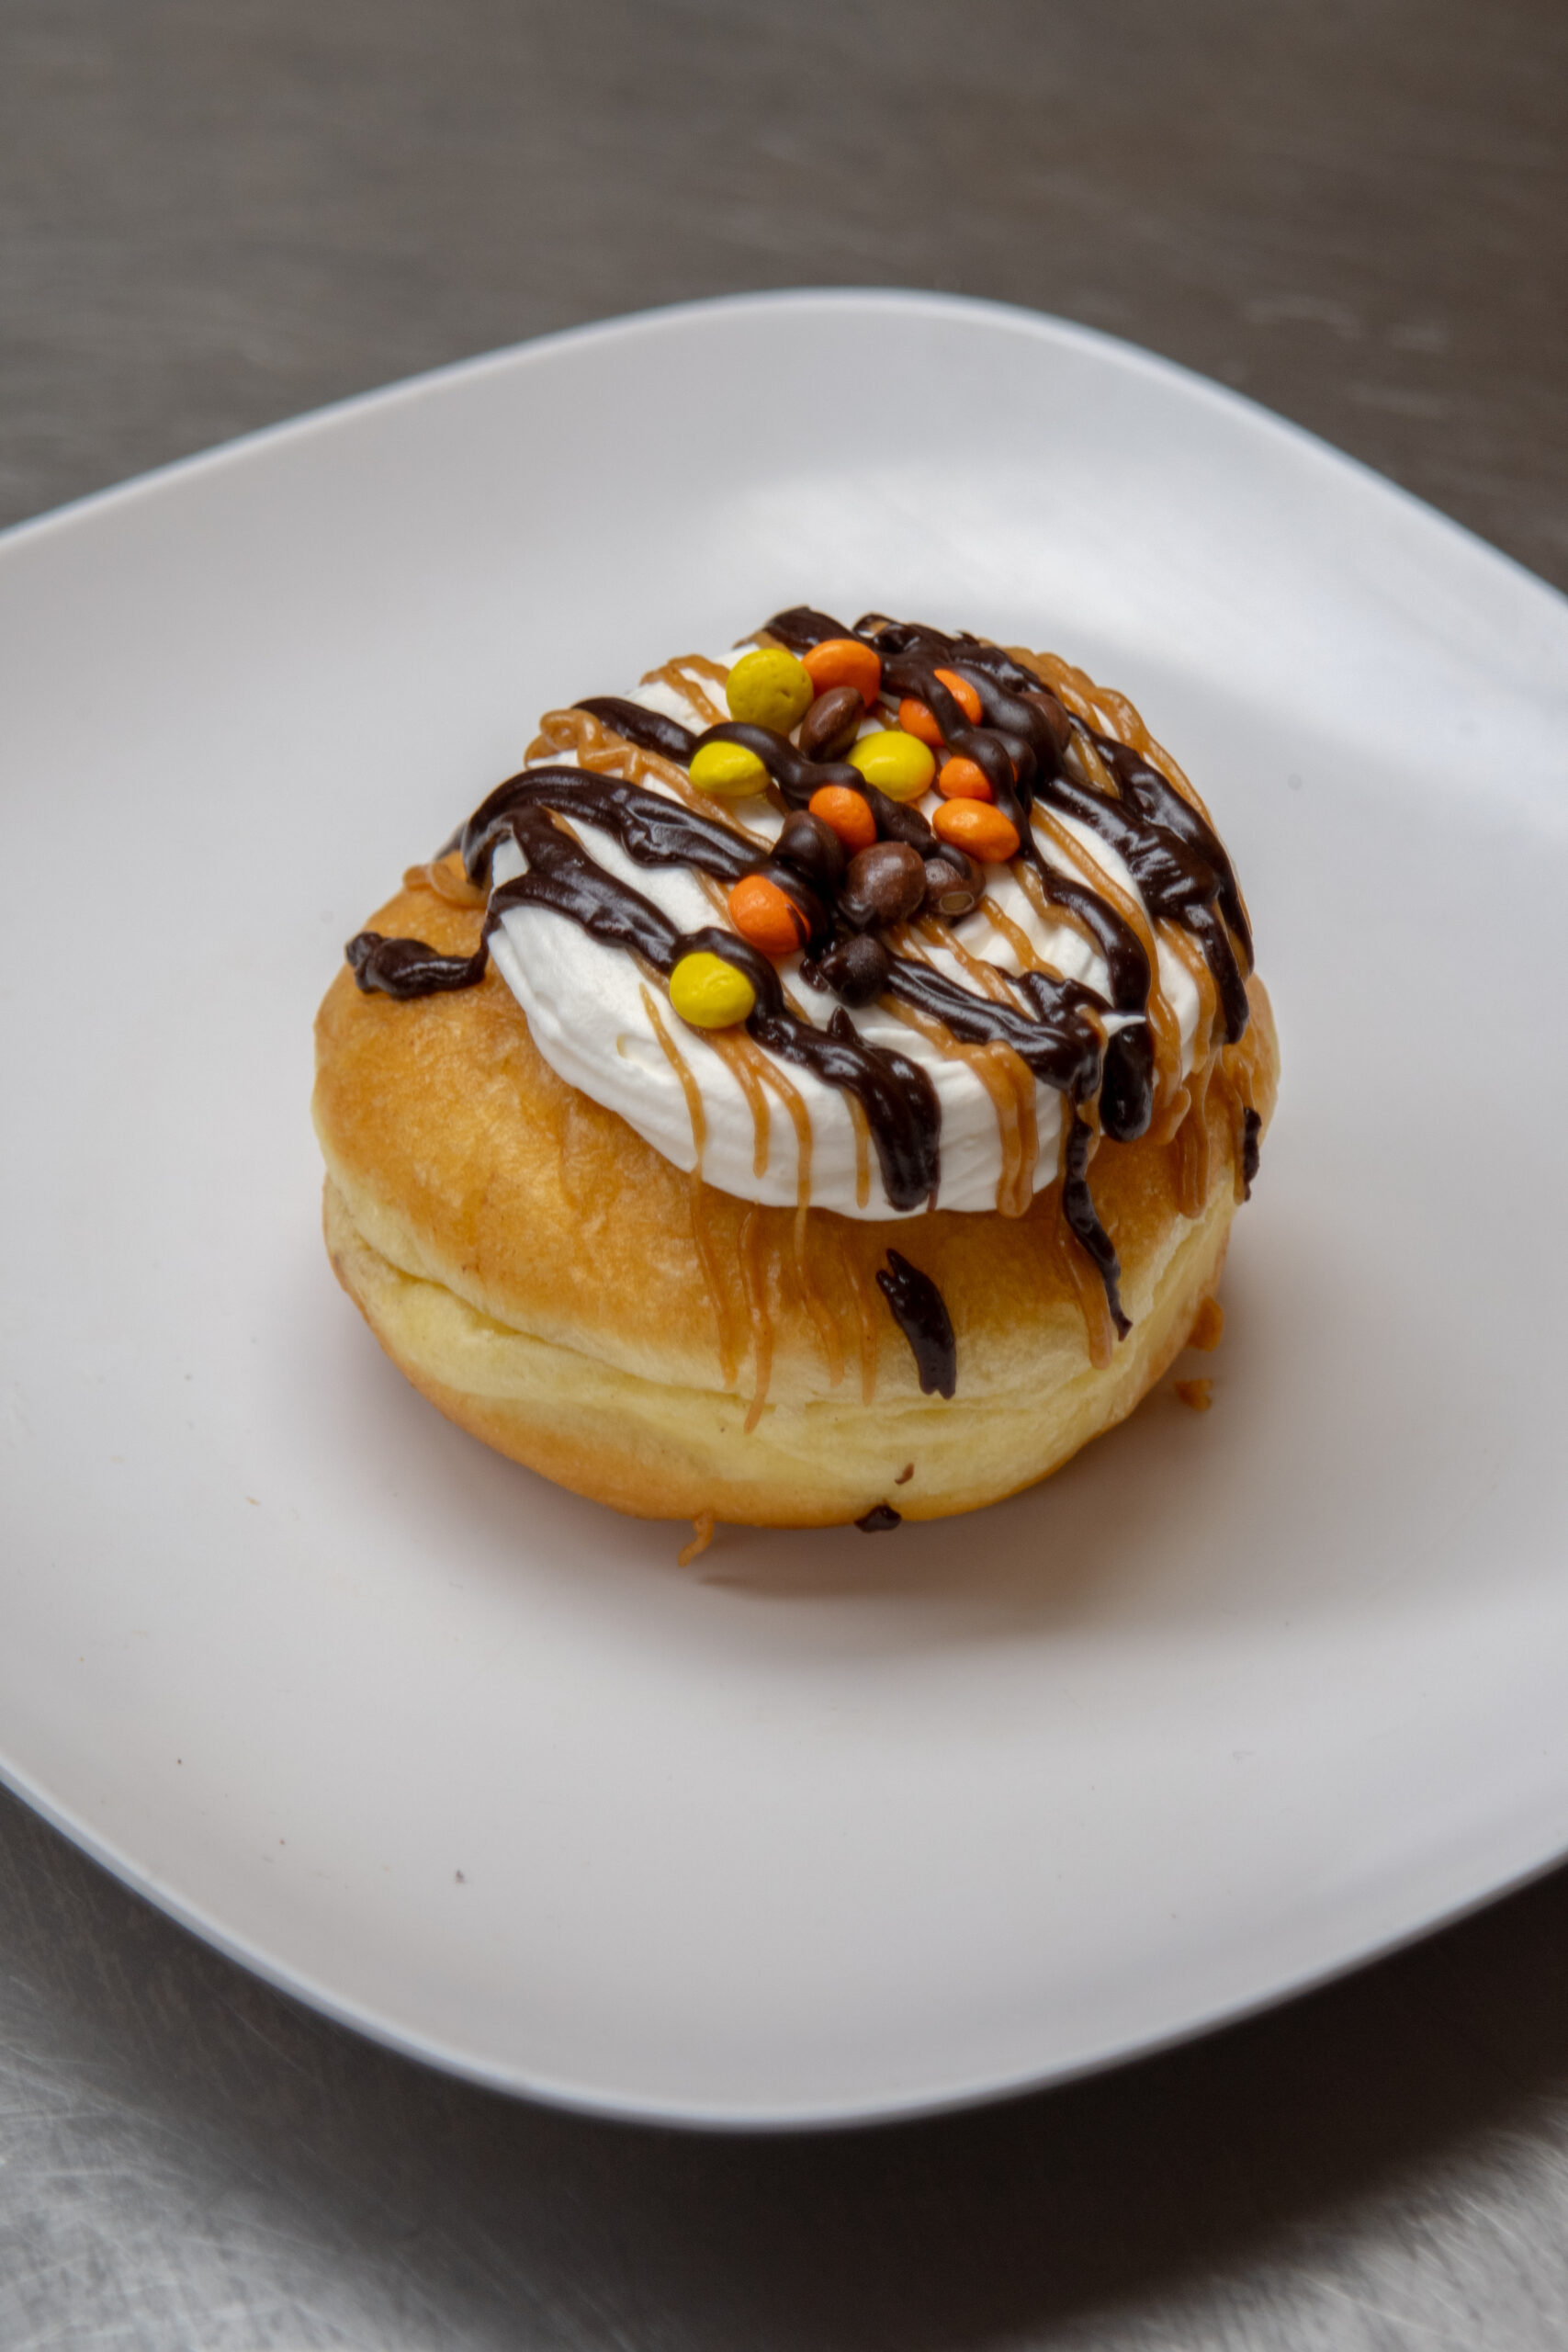 Bombolini donut with reeses pieces drizzled with chocolate and peanut butter